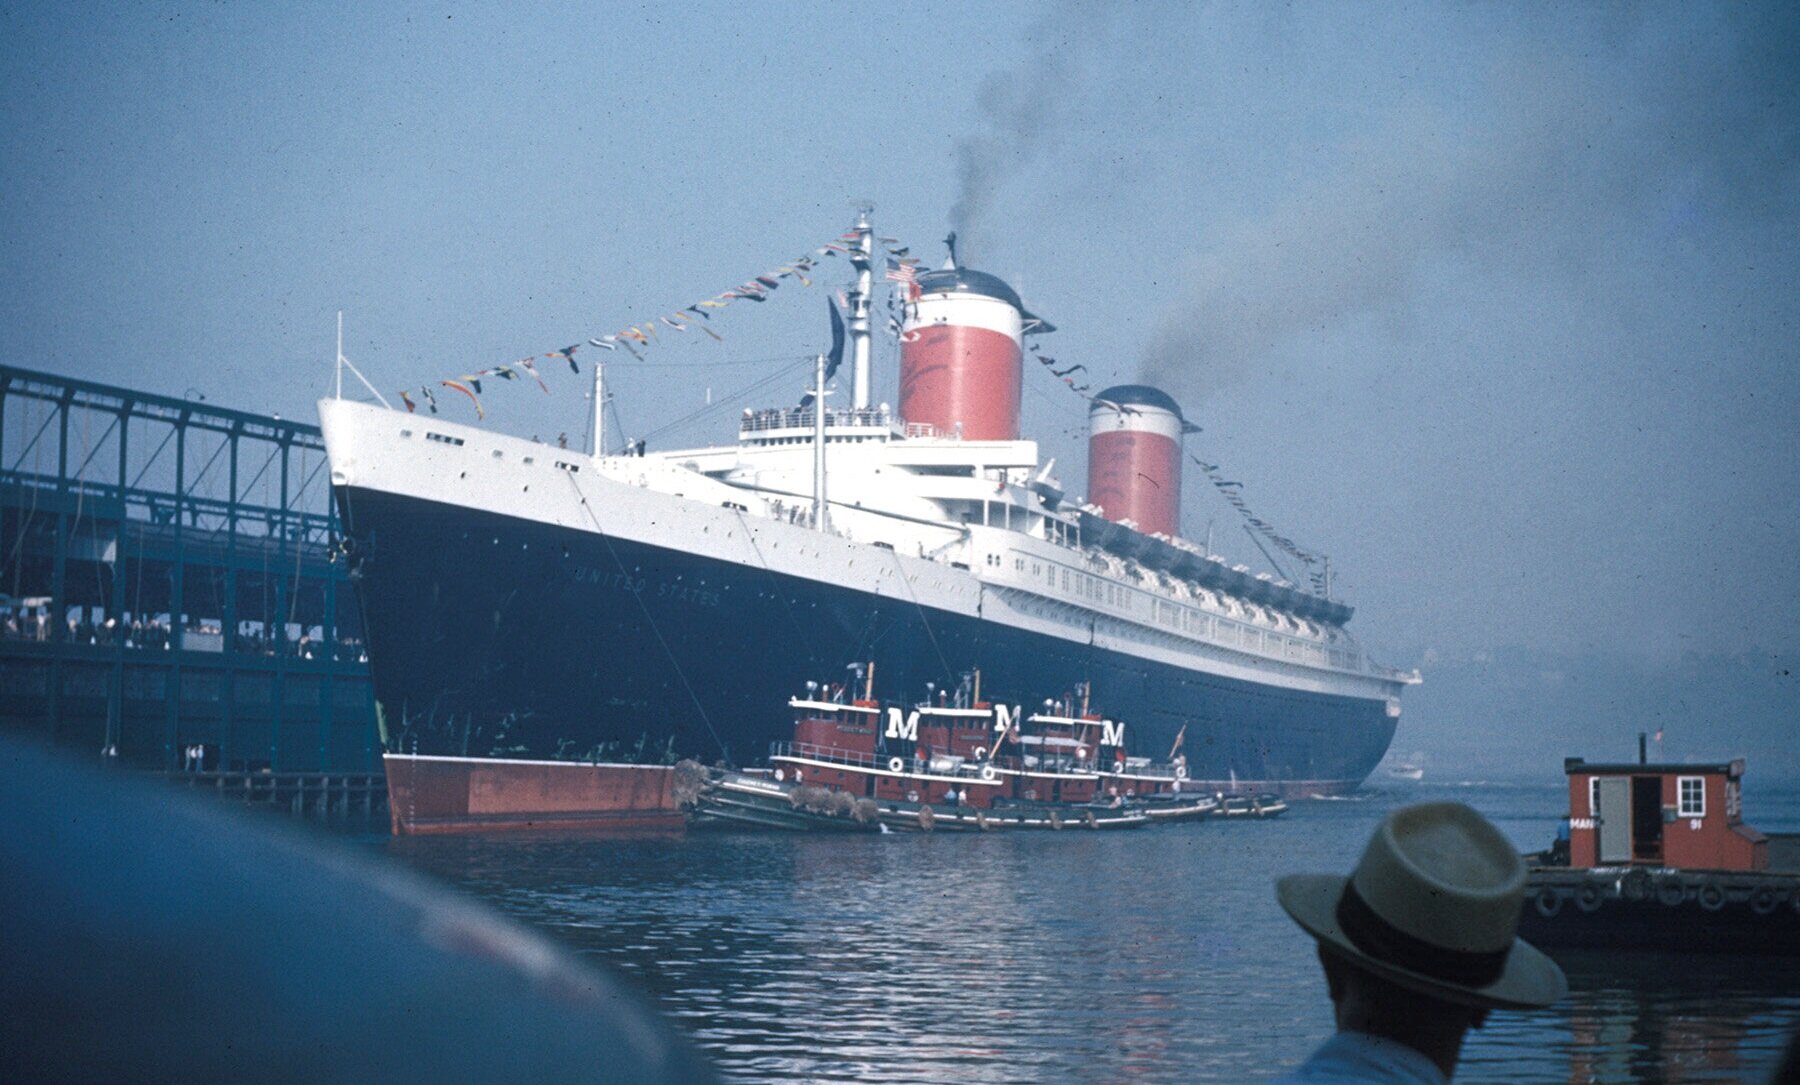 The SS United States returns triumphantly from her maiden voyage (Image courtesy of Ronald Jensh)